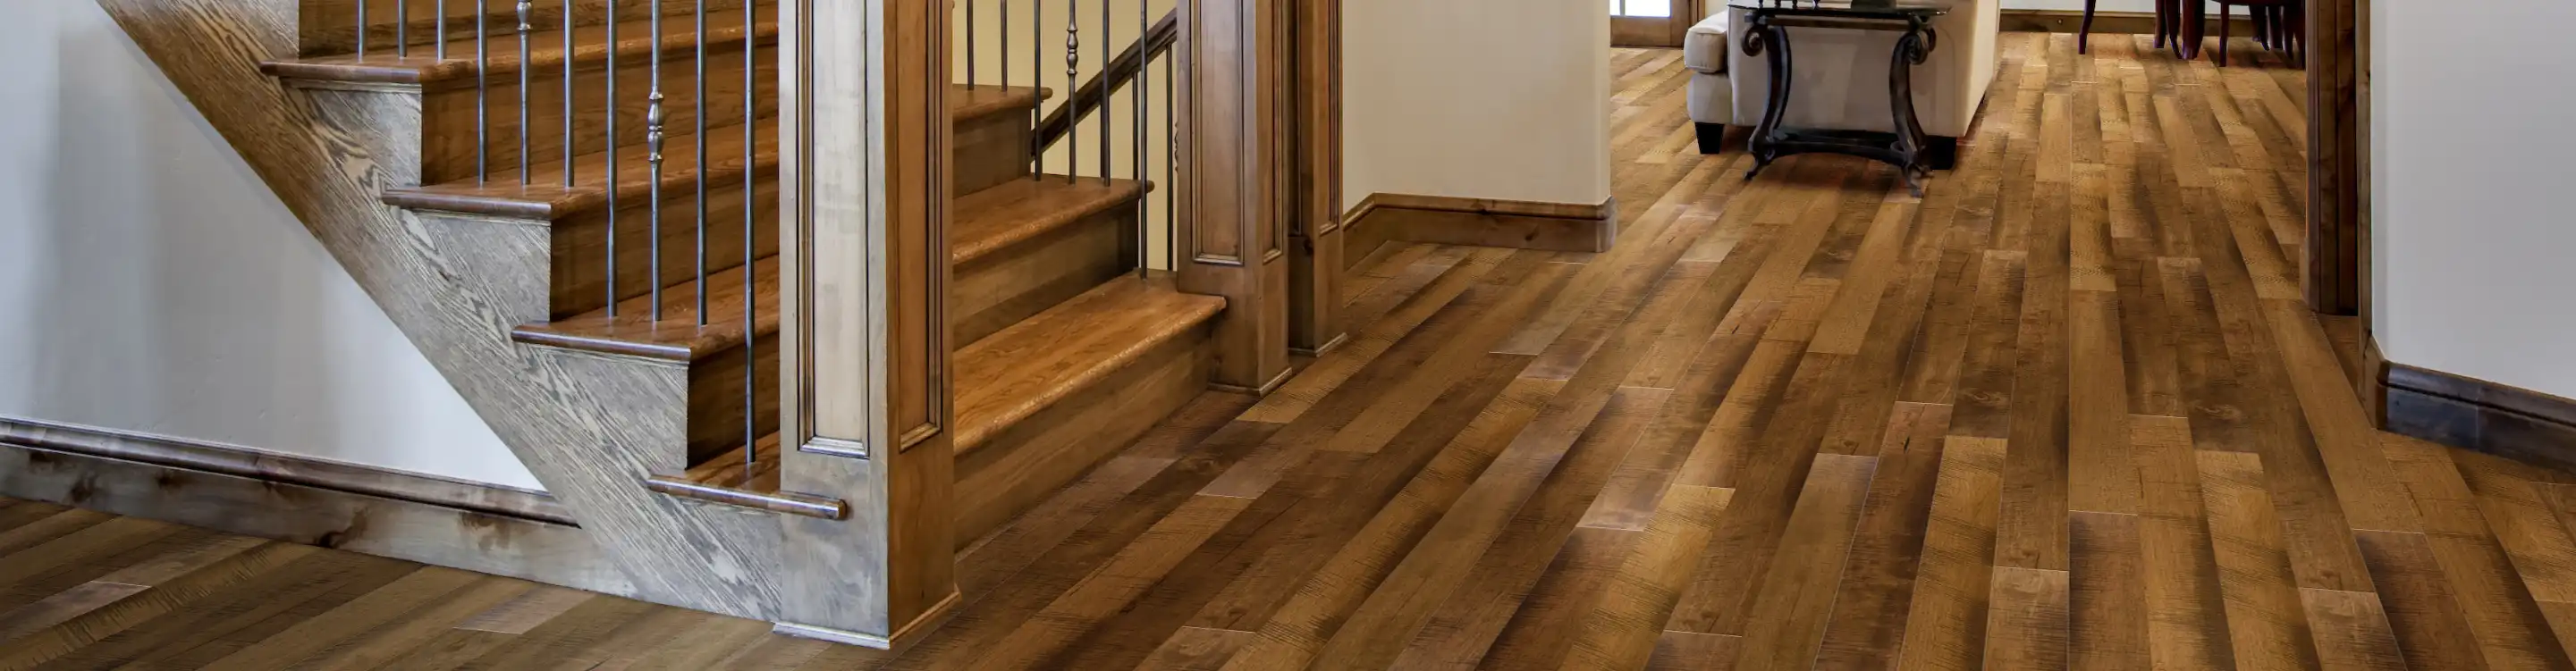 Cherry hardwood floors and staircase